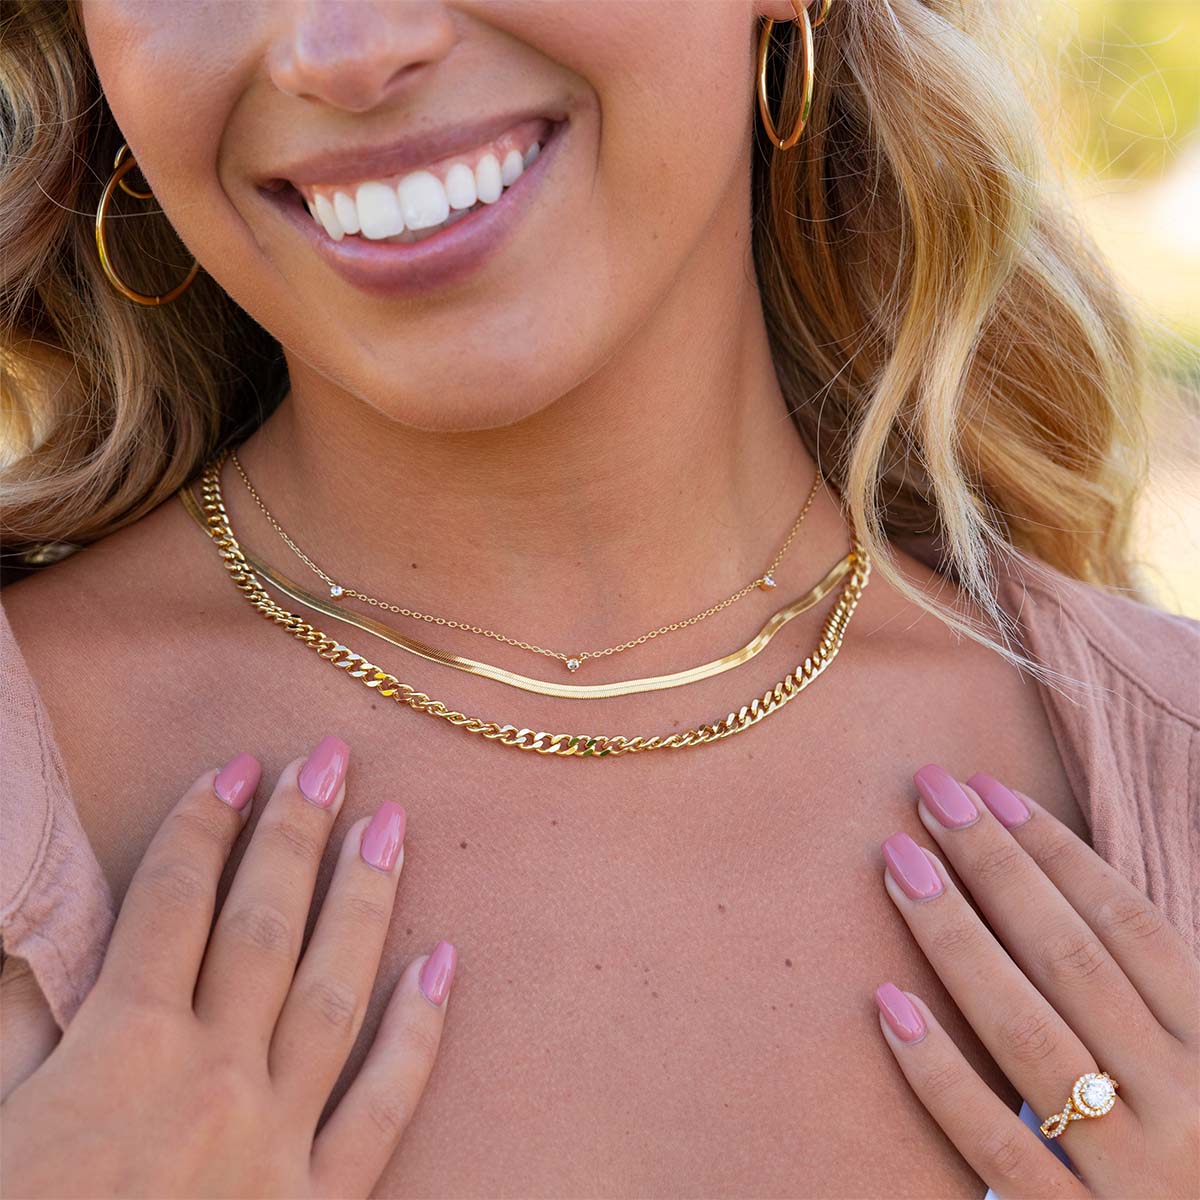 Layered dainty gold chain necklaces